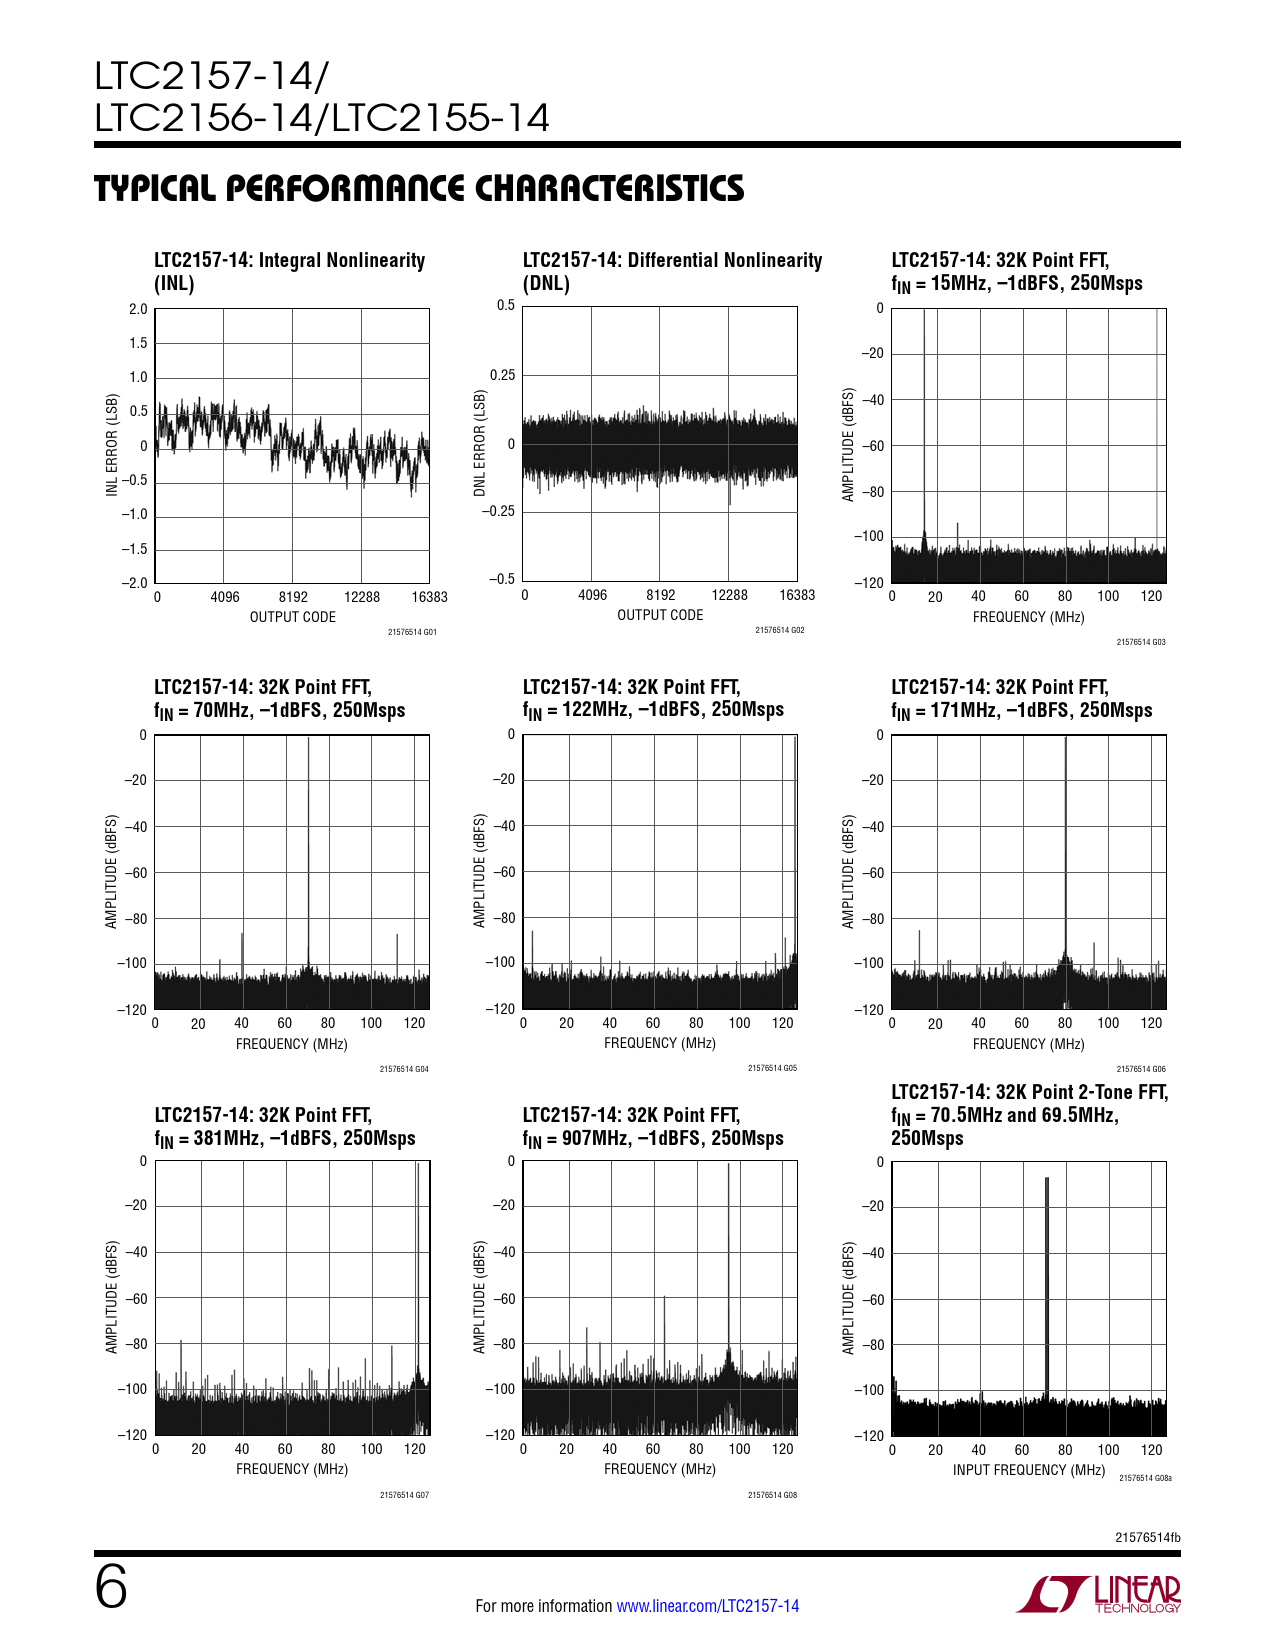 TYPICAL PERFORMANCE CHARACTERISTICS LTC2157-14: Integral Nonlinearity LTC2157-14: Differential Nonlinearity